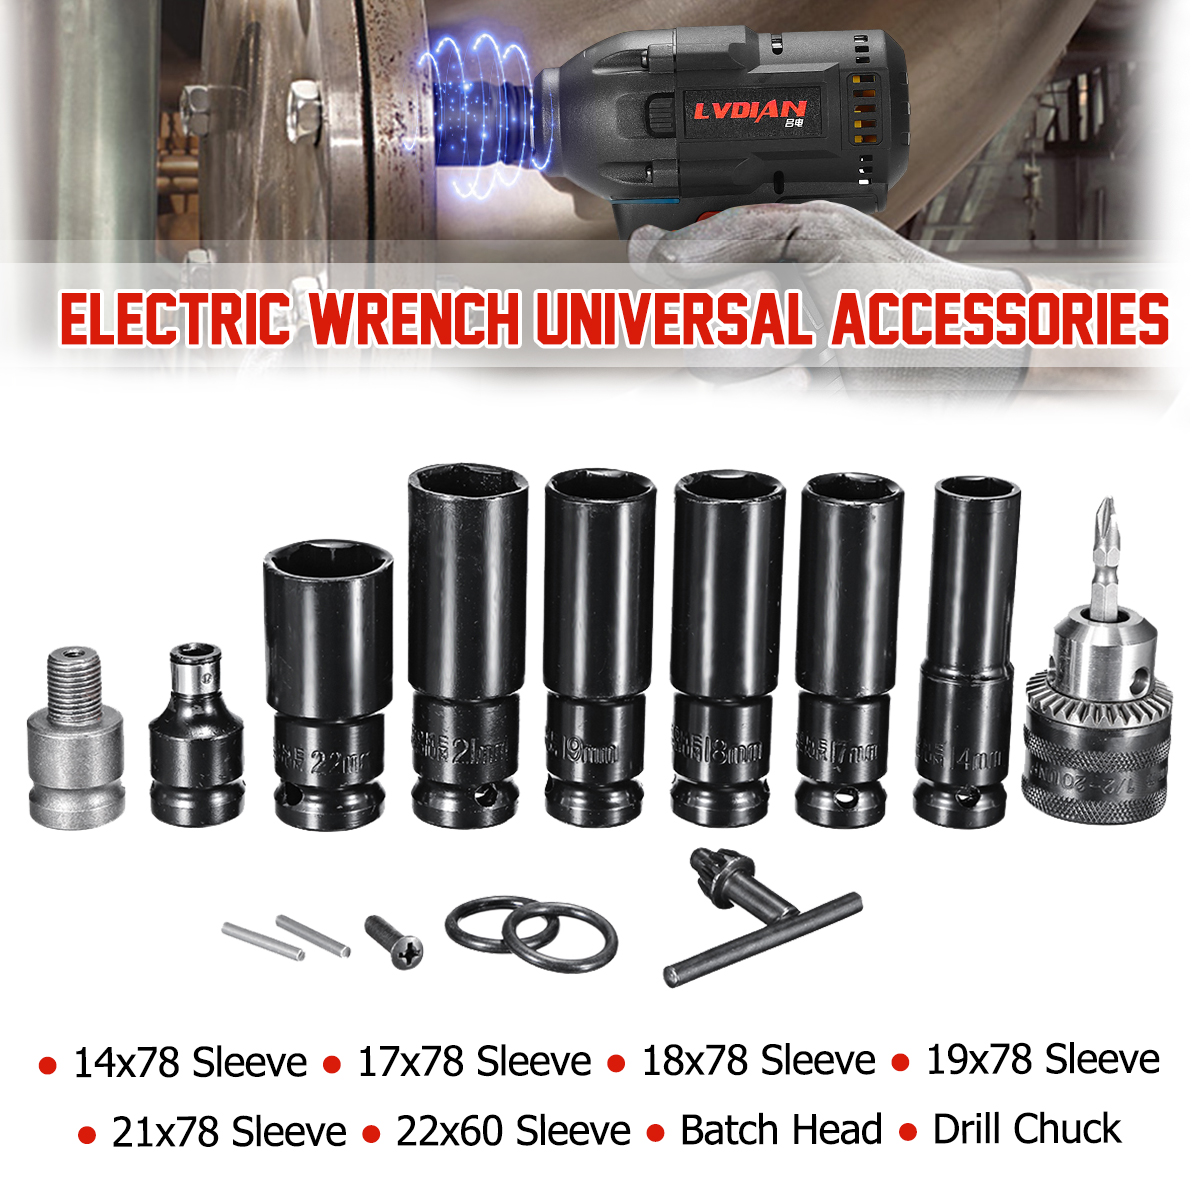 Universal-Accessories-for-Electric-Impact-Socket-Wrench-Sleeves-Batch-Head-Drill-Chuck-Adapter-1575999-1